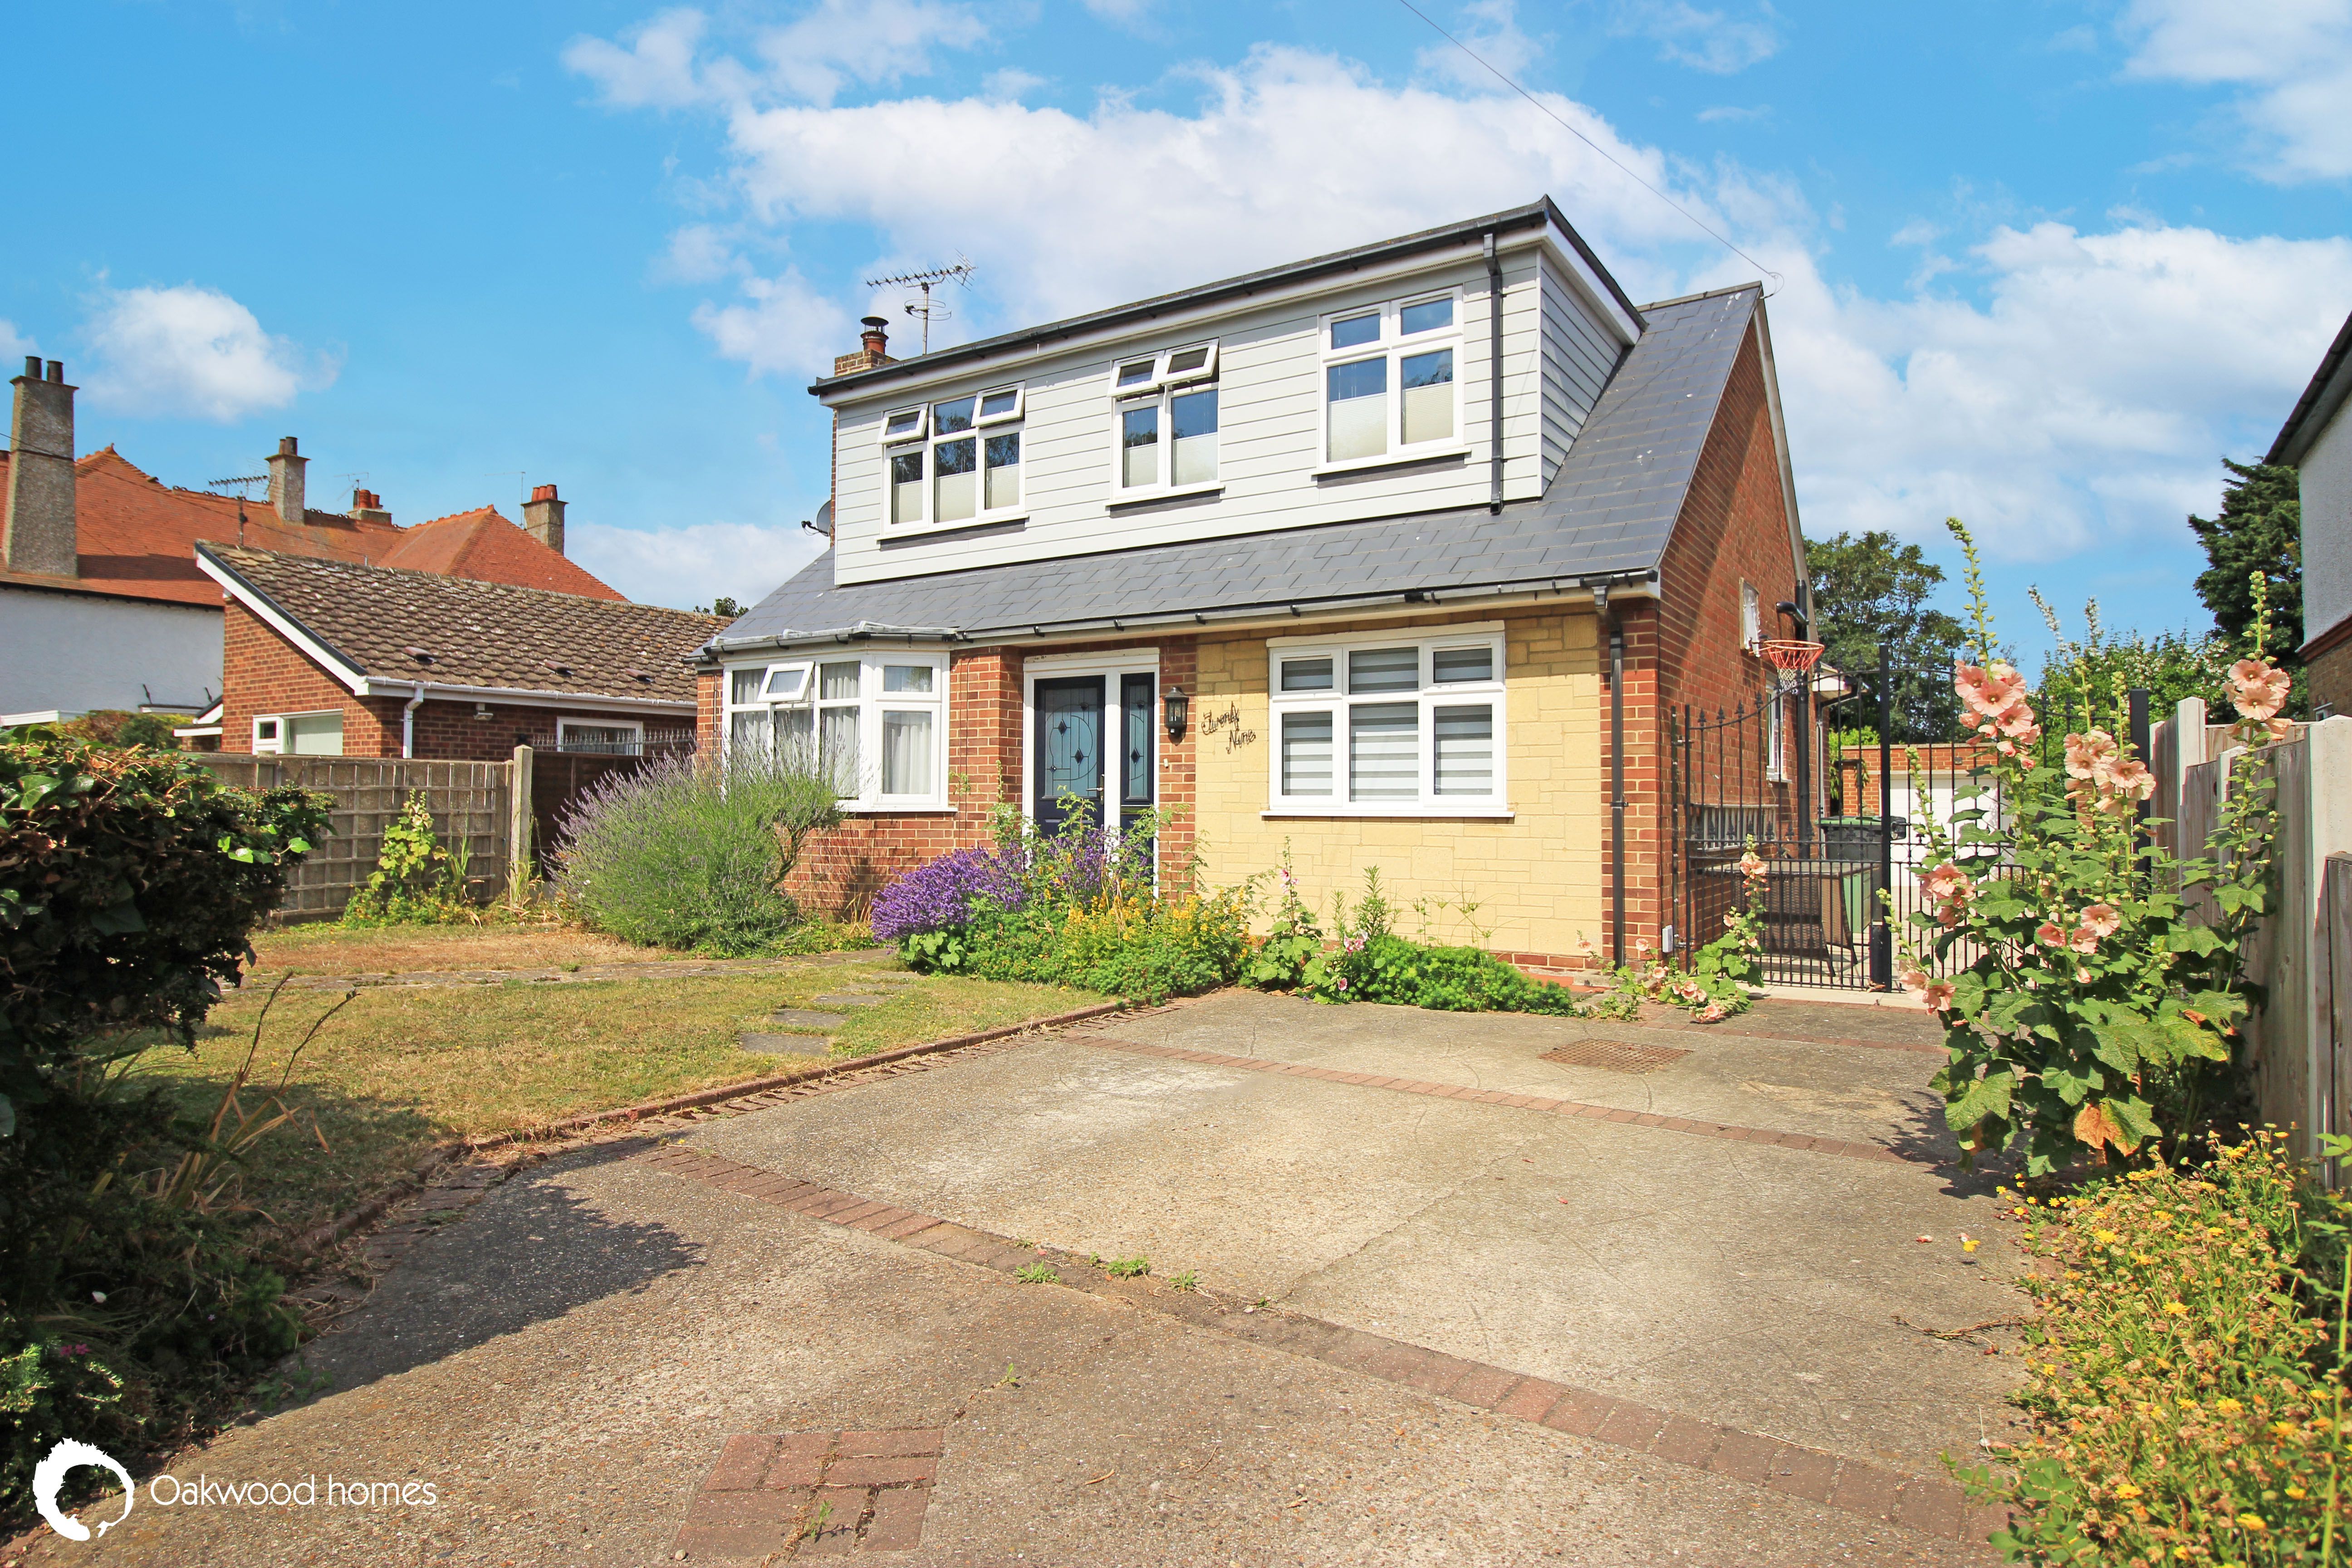 4 bed detached house for sale in Kingsgate Avenue, Broadstairs - Property Image 1